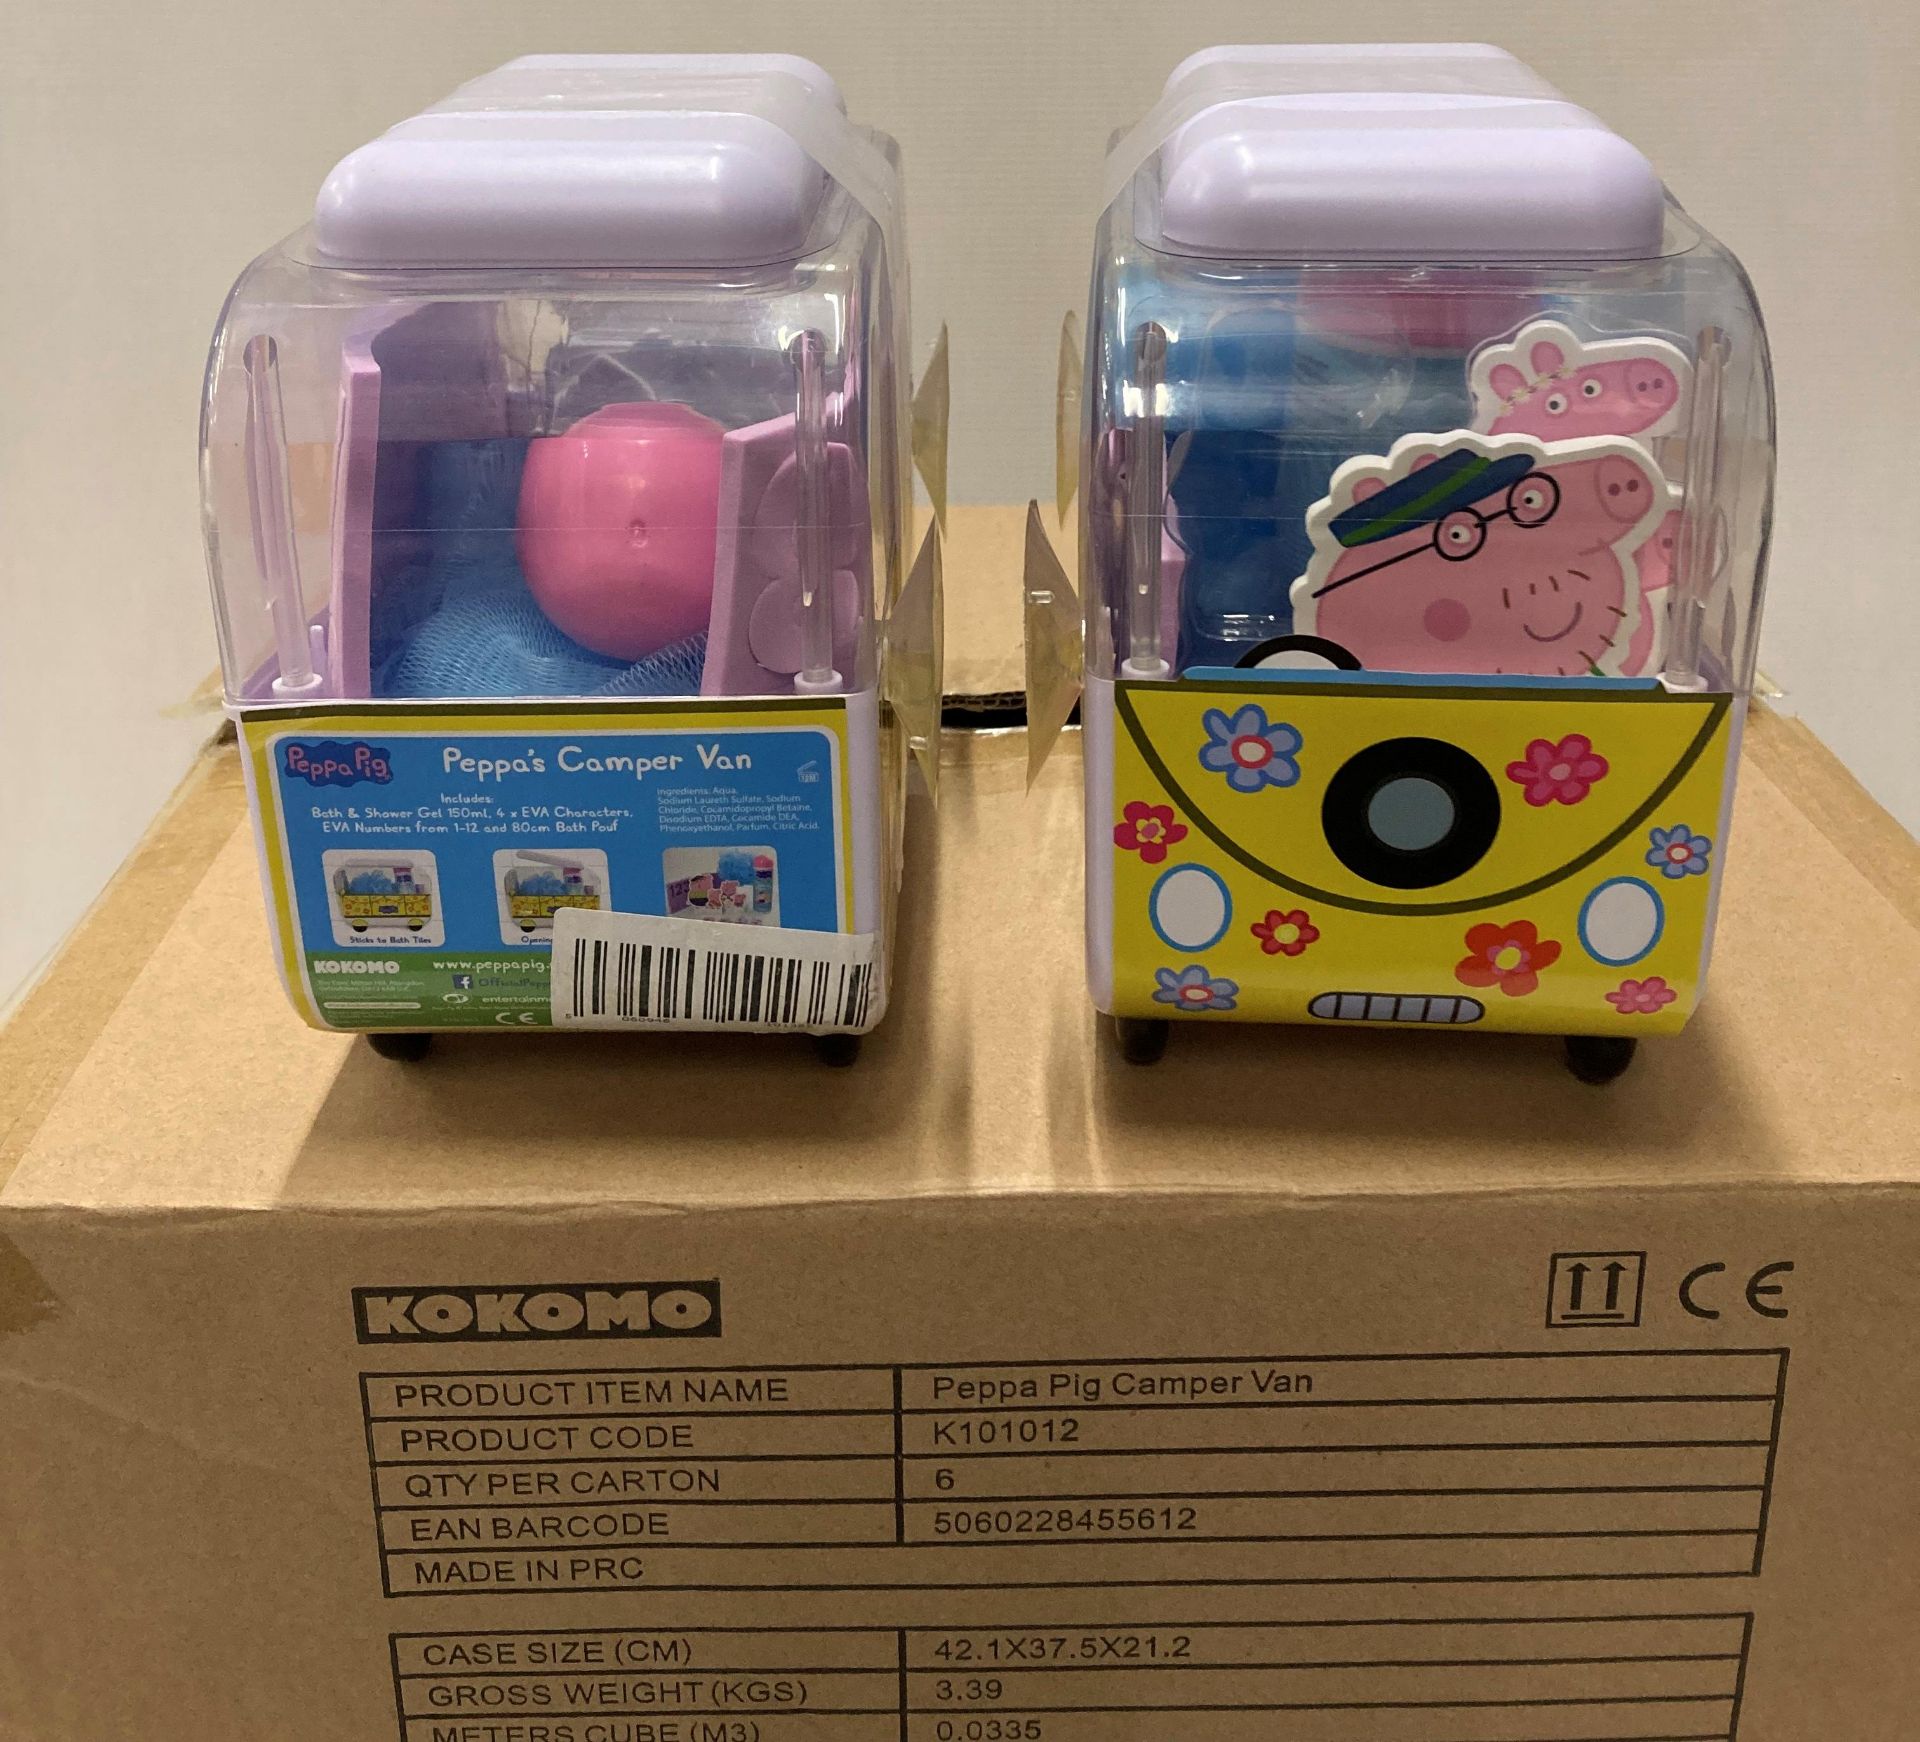 30 x Peppa Pig Campervan Bath Sets (with cut-out Peppa Pig characters, bath numbers, - Image 2 of 3